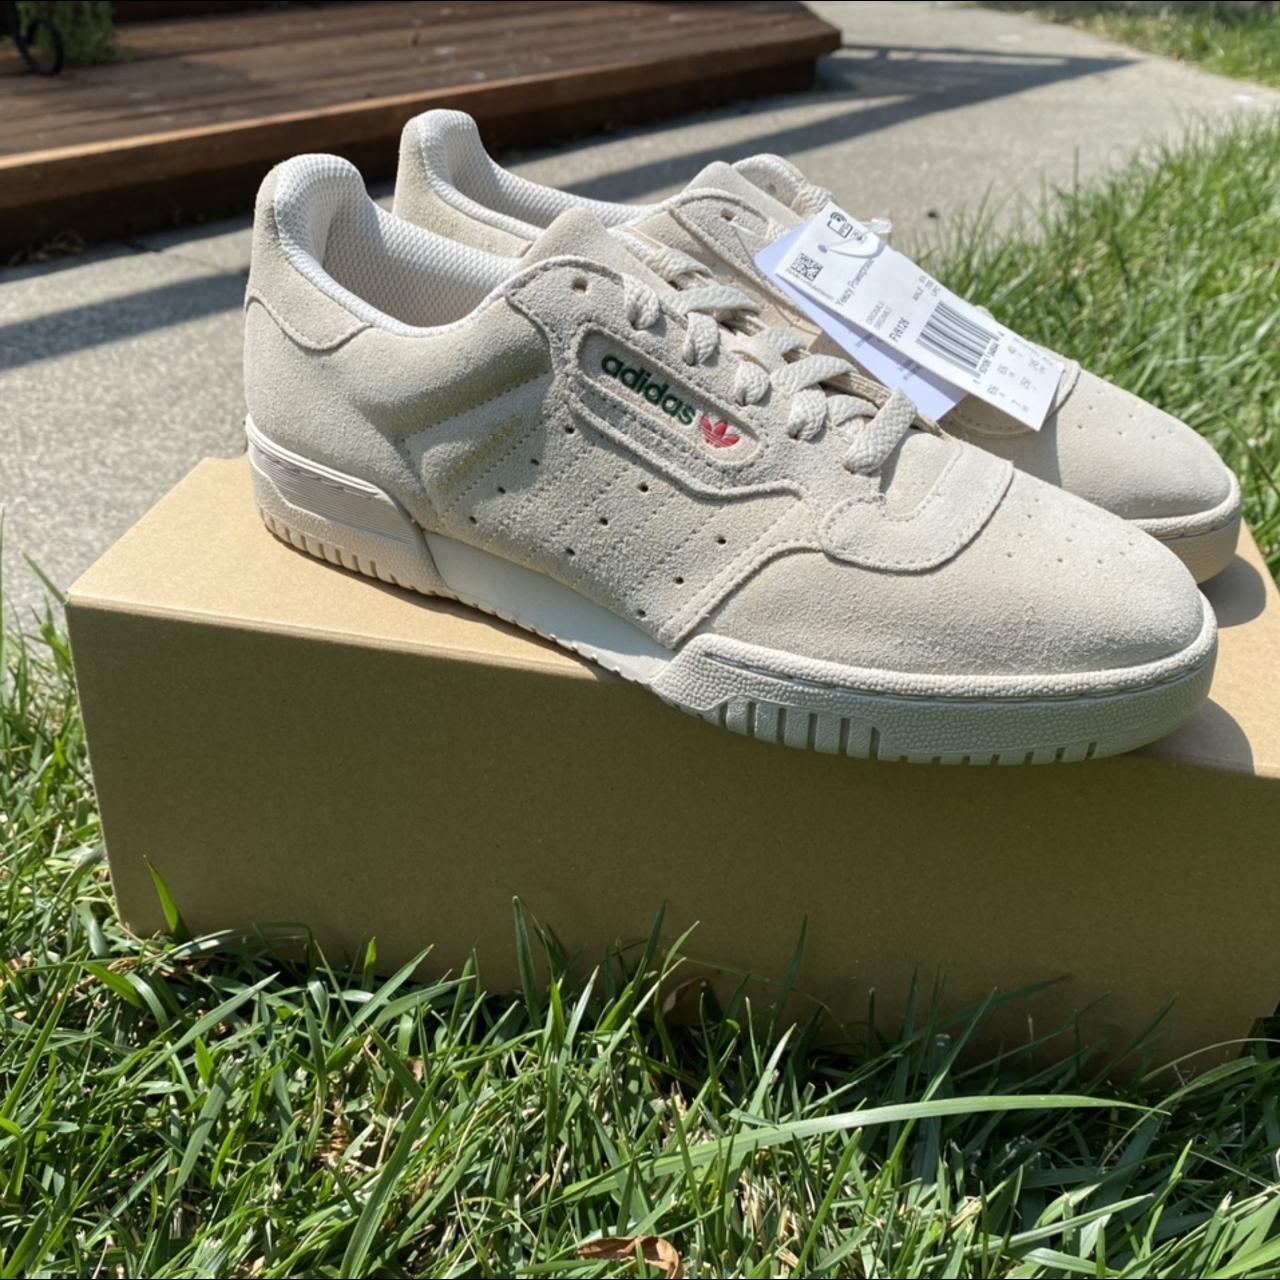 Yeezy Powerphase Clear Brown Men's size 7 will